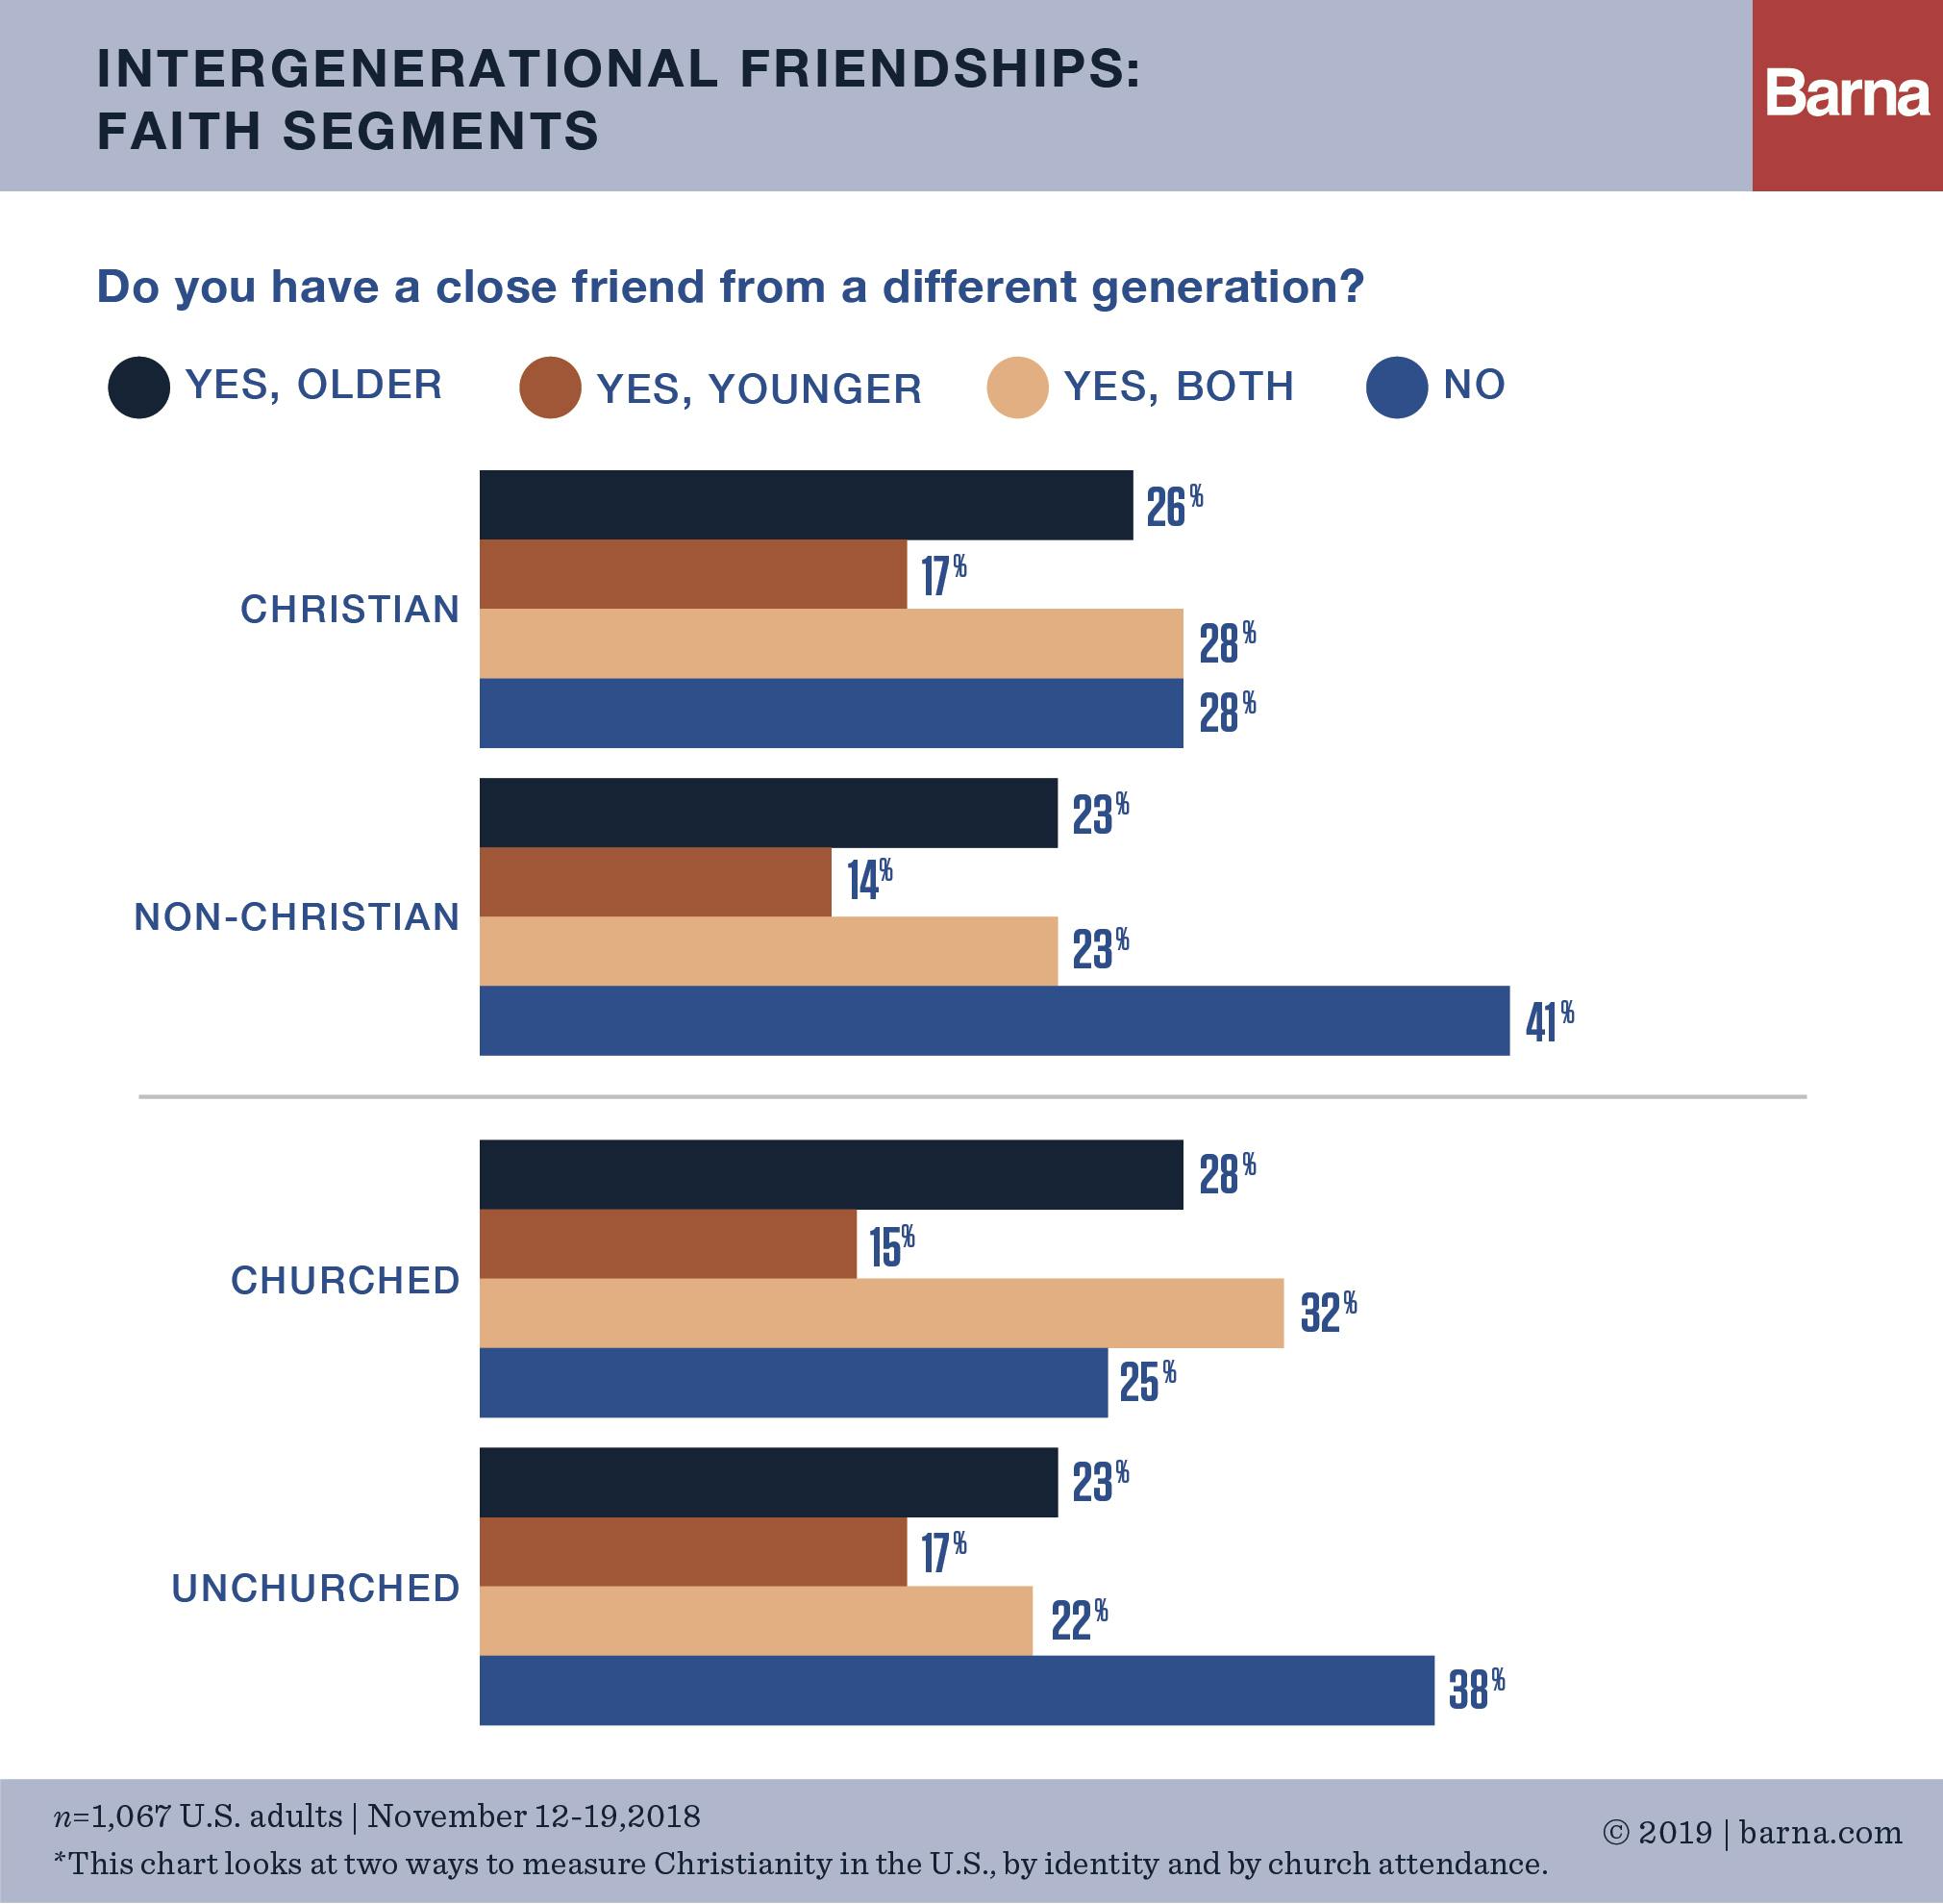 Two-Thirds of Americans Have Multigenerational Friendships